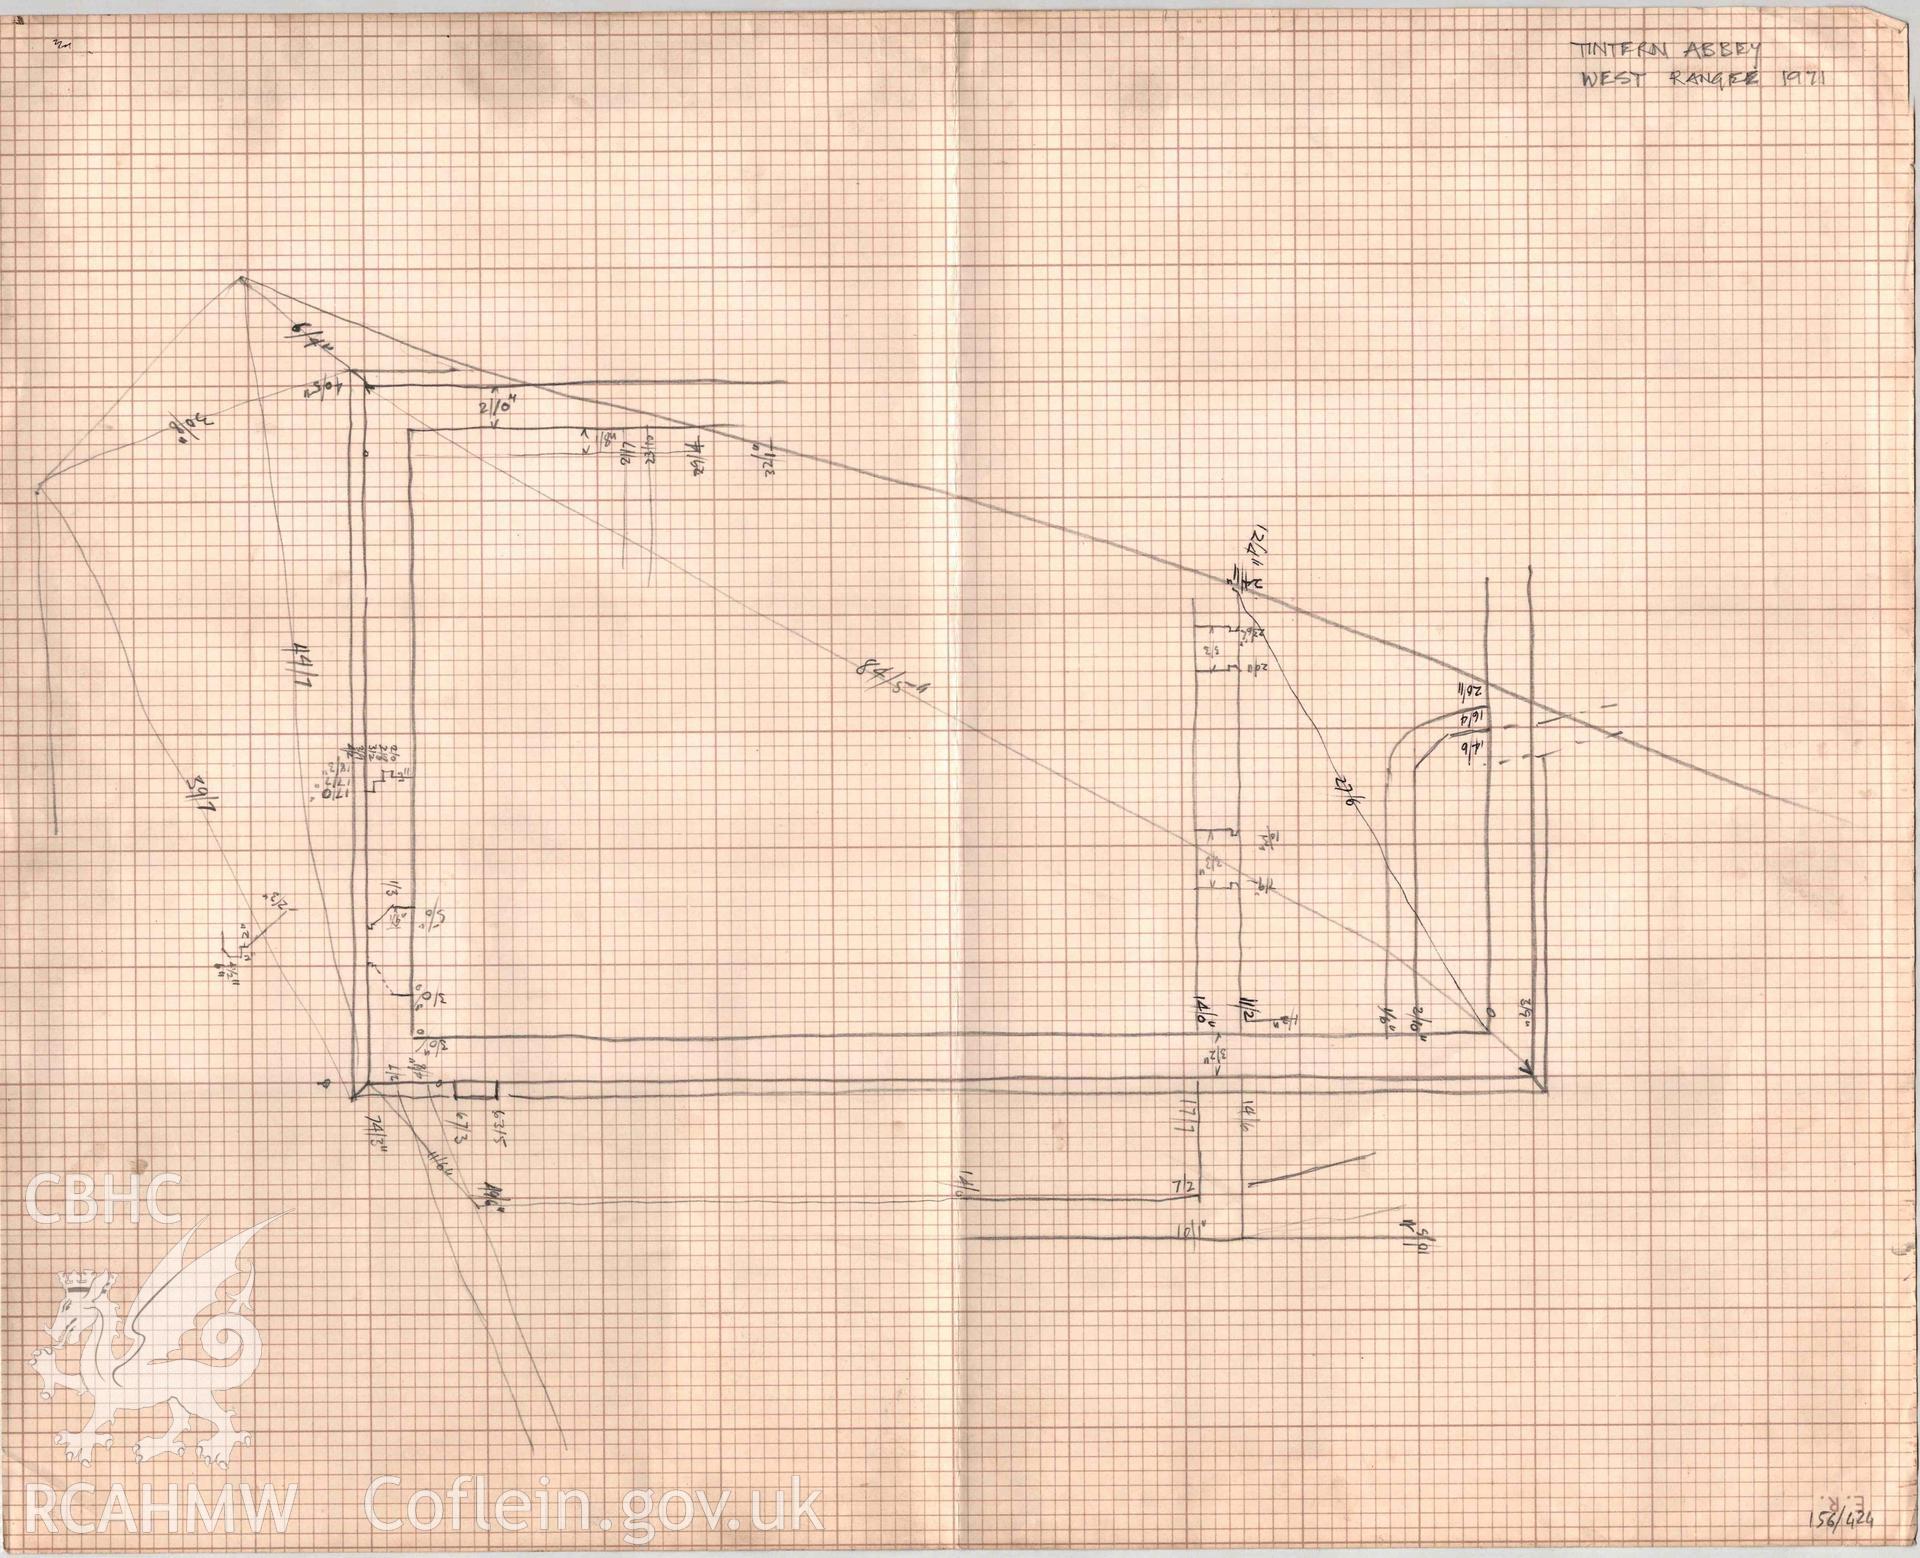 Cadw Guardianship monument drawing, 6 sheets, pencil on graph paper, field notes on layout of west range, cottages and car park, Tintern Abbey. Dated 1971.